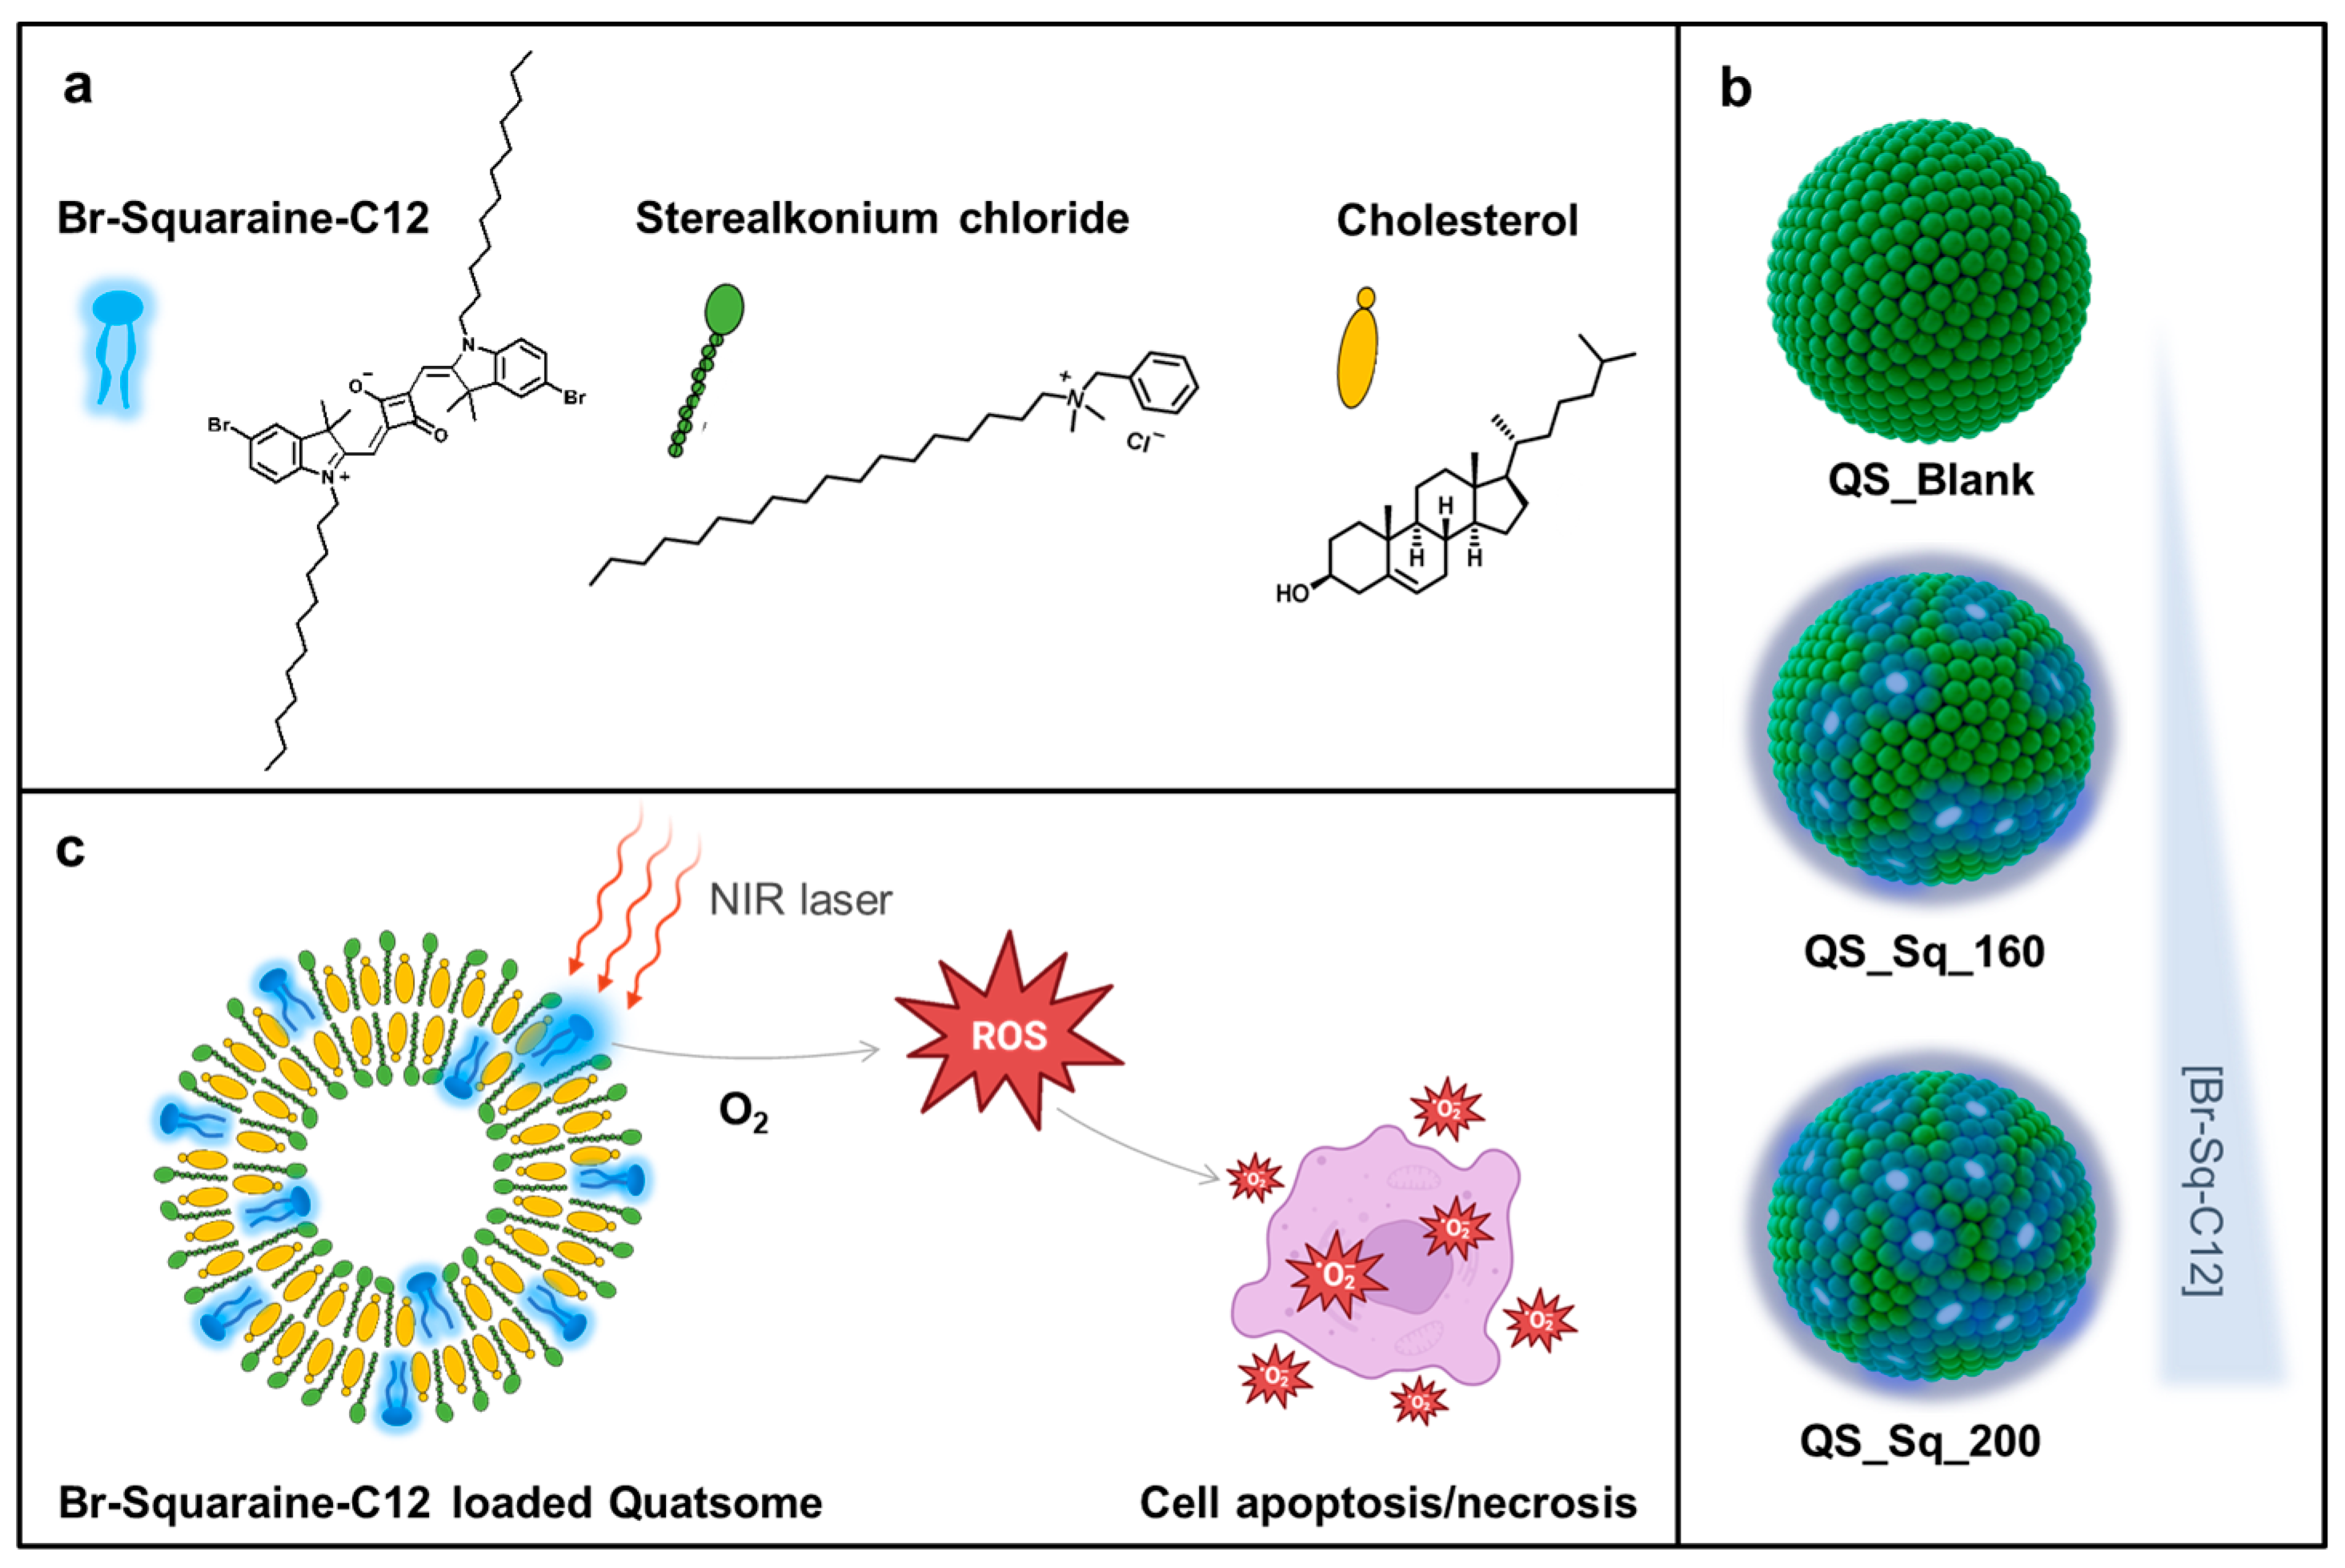 Pharmaceutics | Photosensitizer Photodynamic an as Quatsomes Therapy for with | Squaraine Loaded Full-Text Dye Free Effective